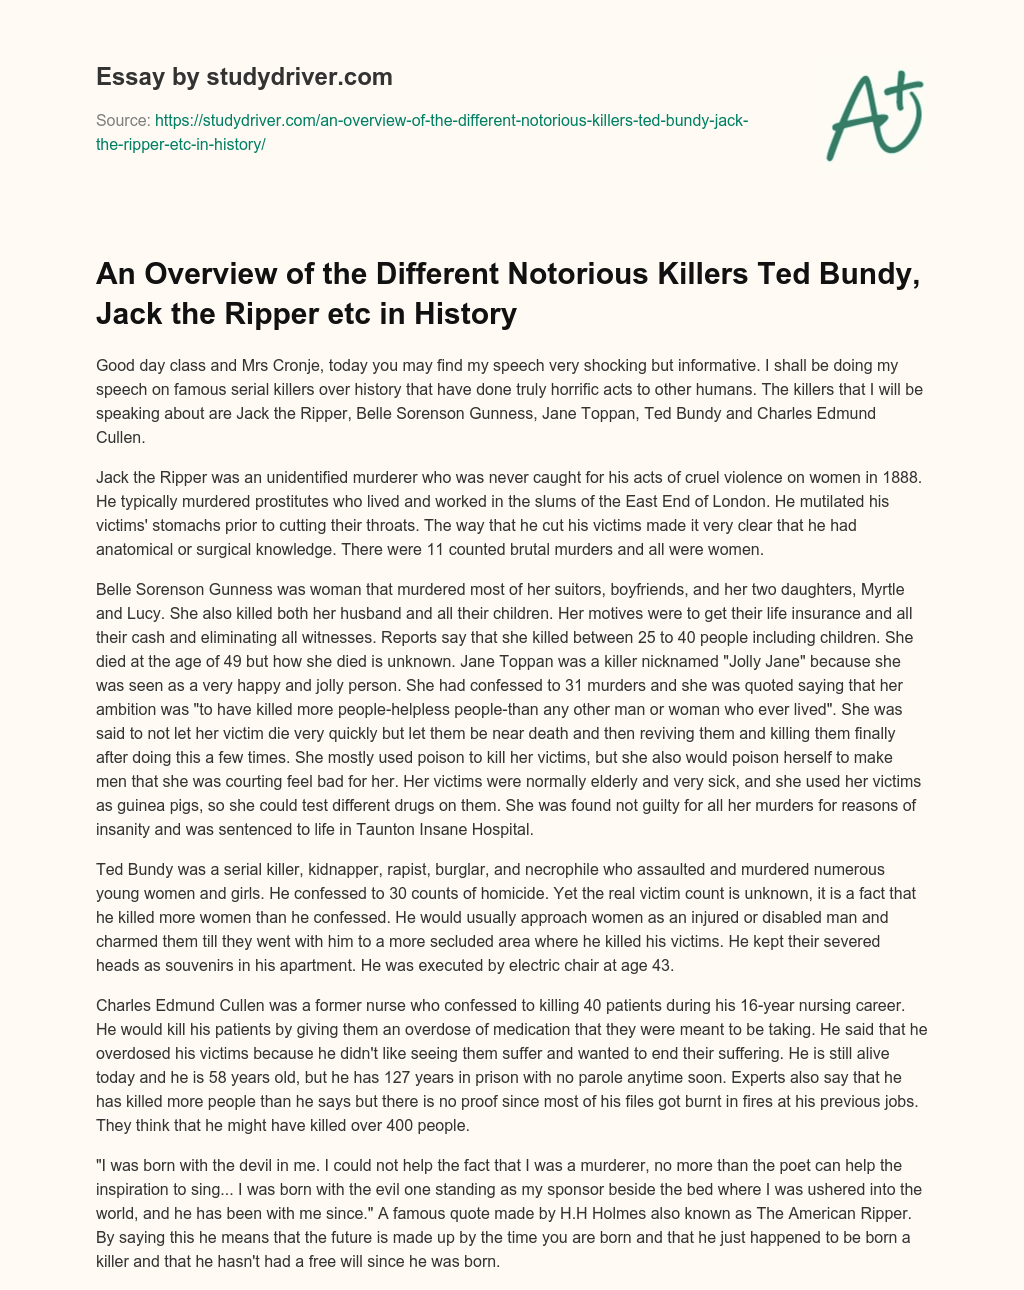 An Overview of the Different Notorious Killers Ted Bundy, Jack the Ripper Etc in History essay